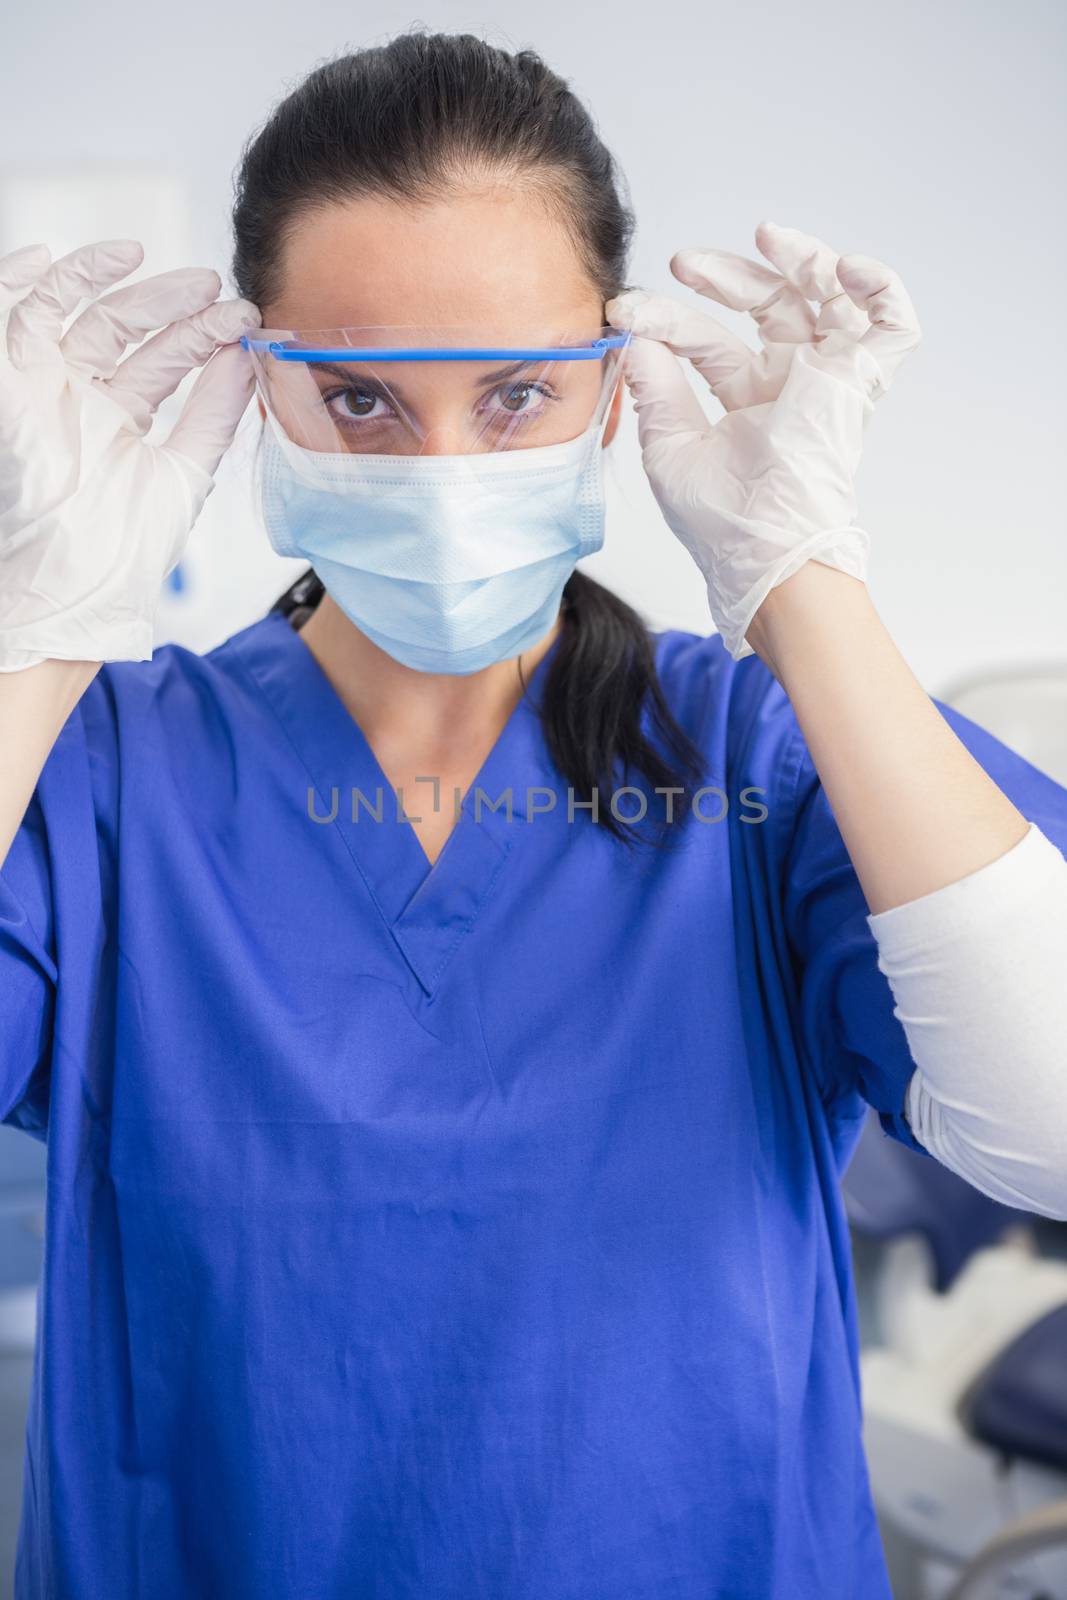 Dentist with surgical mask putting on her safety glasses in dental clinic 